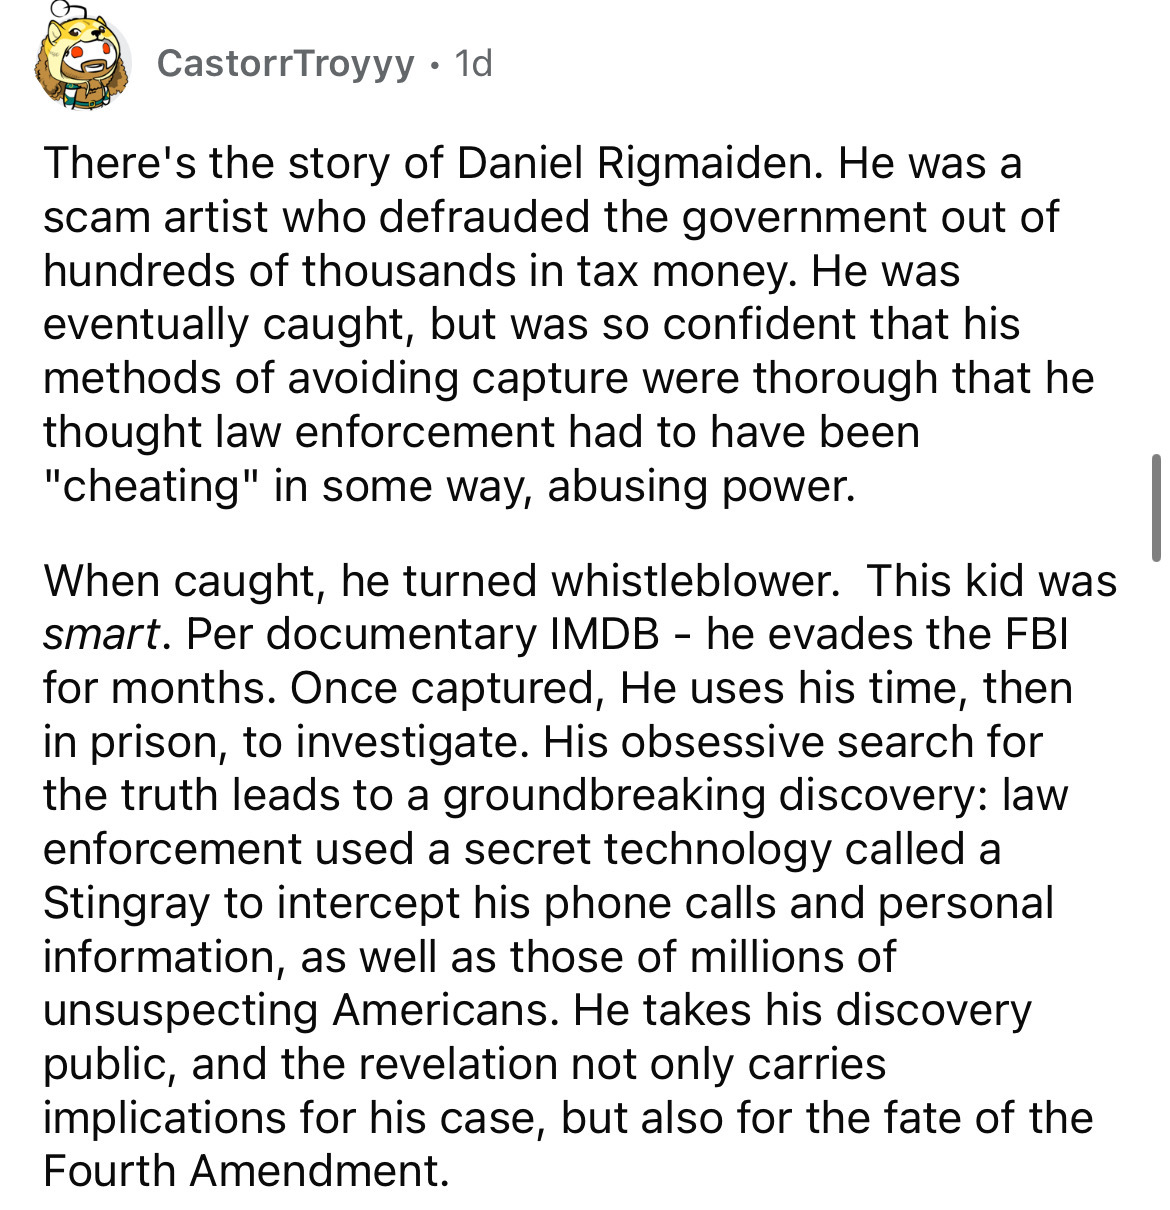 angle - Castorr Troyyy . 1d There's the story of Daniel Rigmaiden. He was a scam artist who defrauded the government out of hundreds of thousands in tax money. He was eventually caught, but was so confident that his methods of avoiding capture were thorou